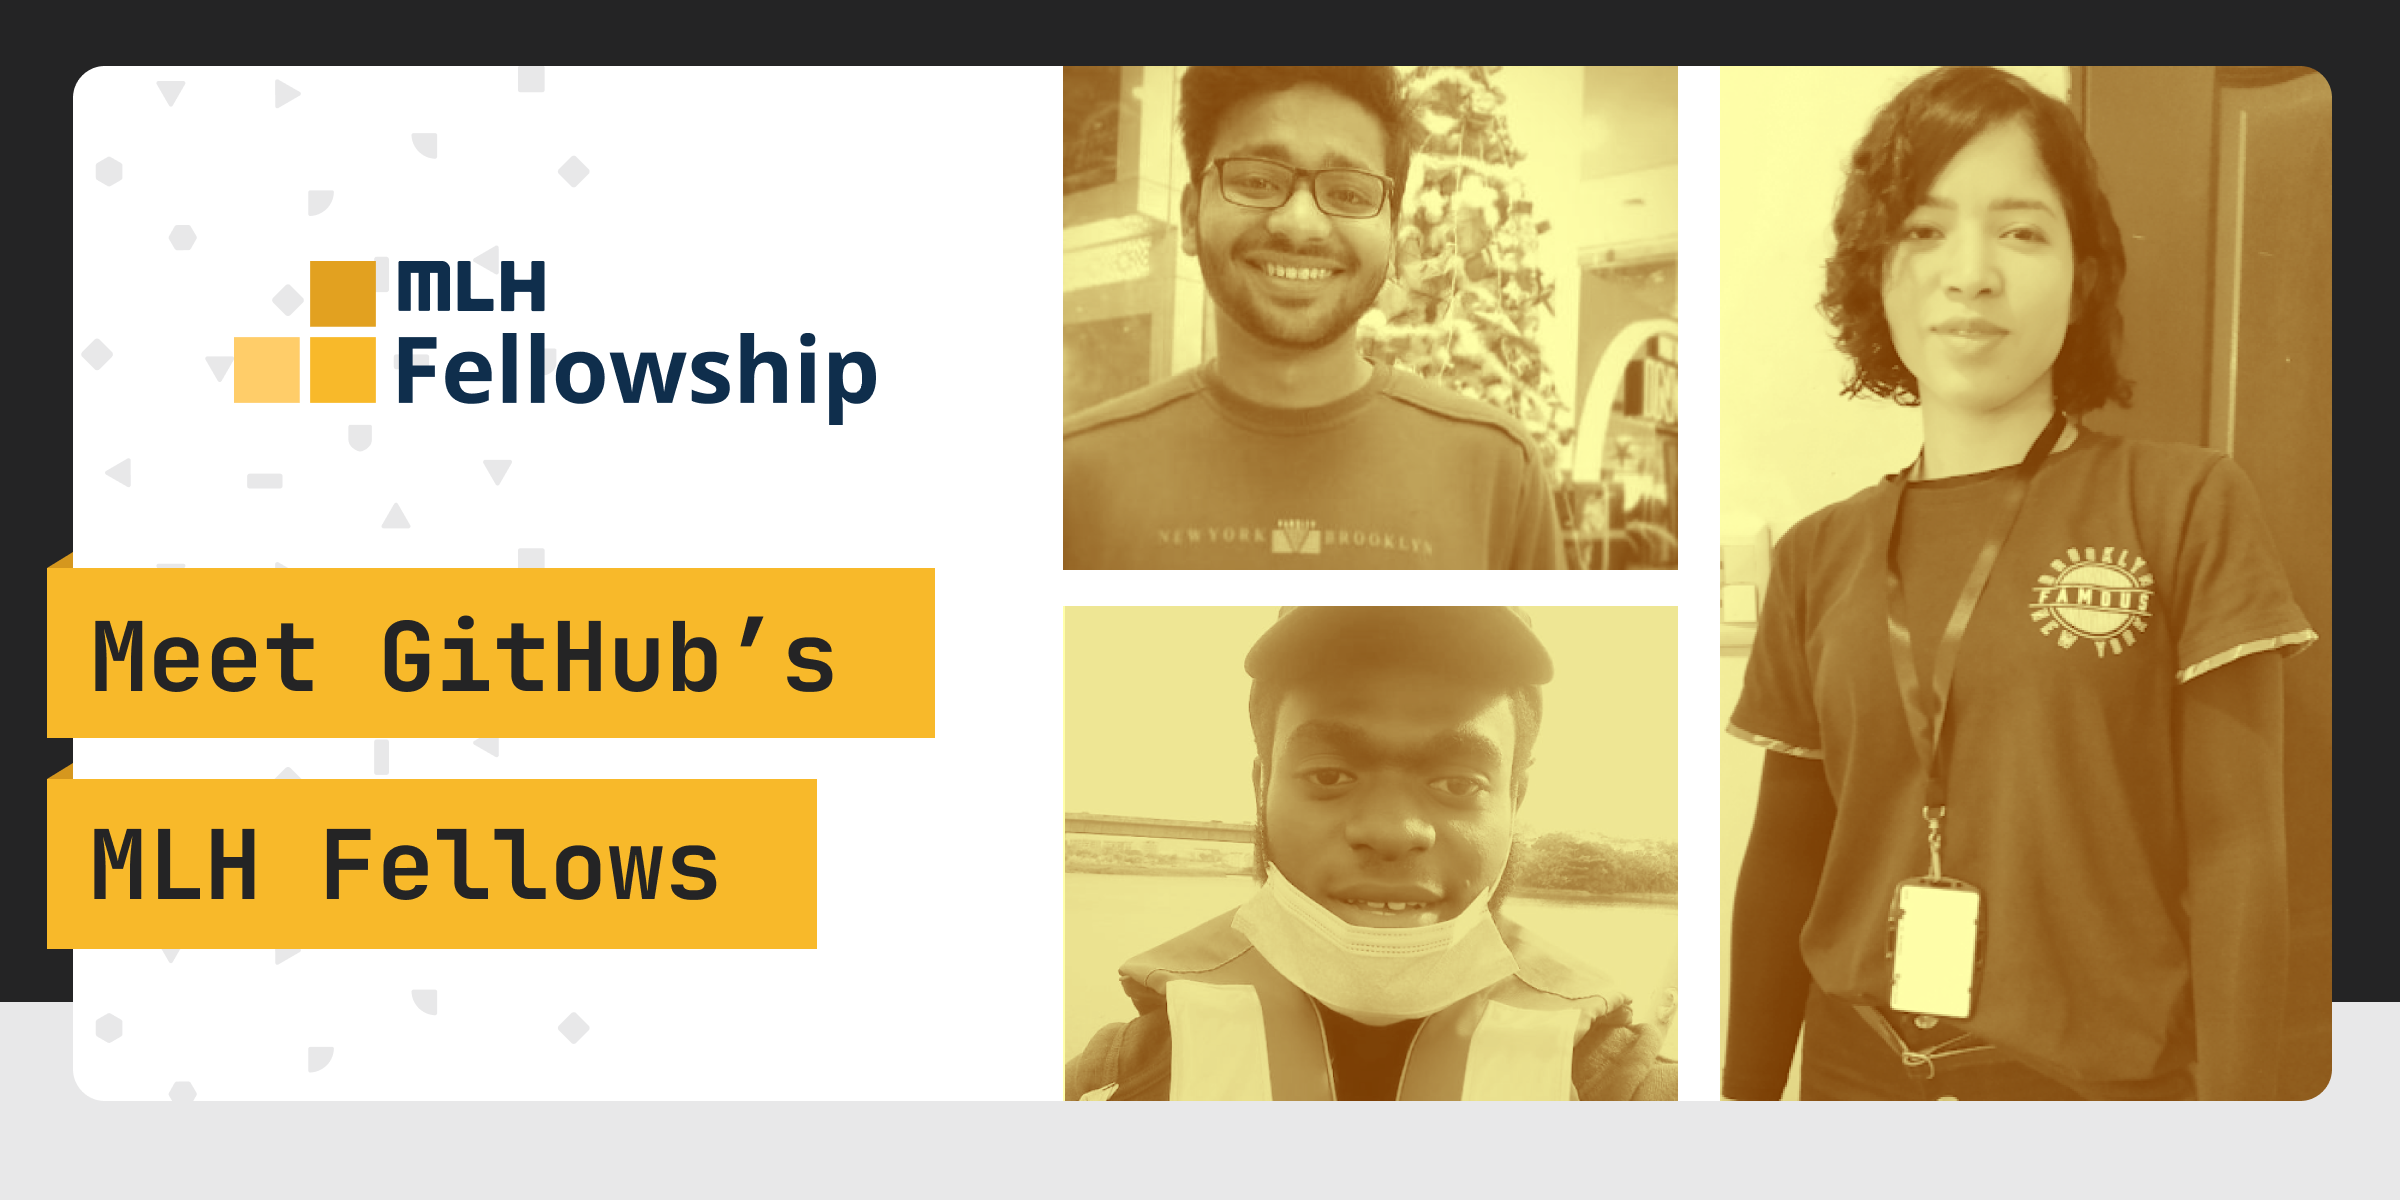 The GitHub Campus Experts Selected for the Fall 2022 MLH Fellowship Cohort